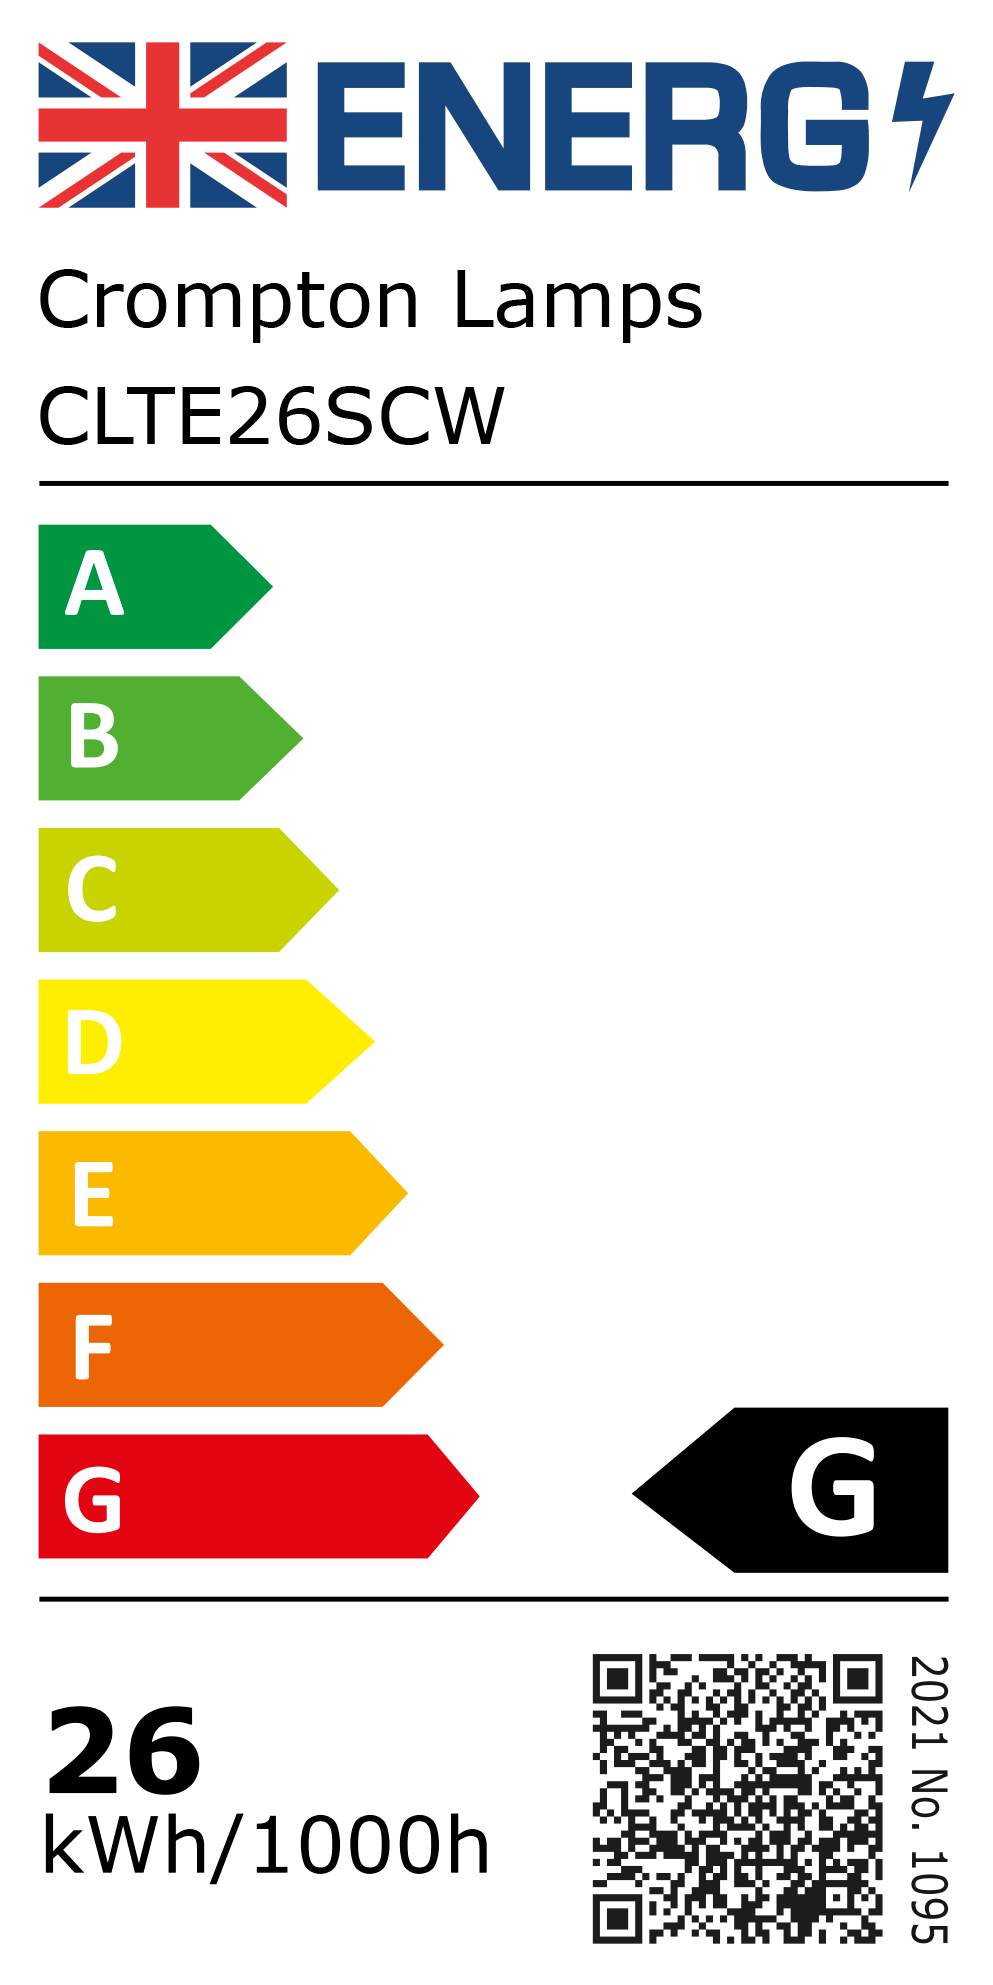 New 2021 Energy Rating Label: Stock Code CLTE26SCW